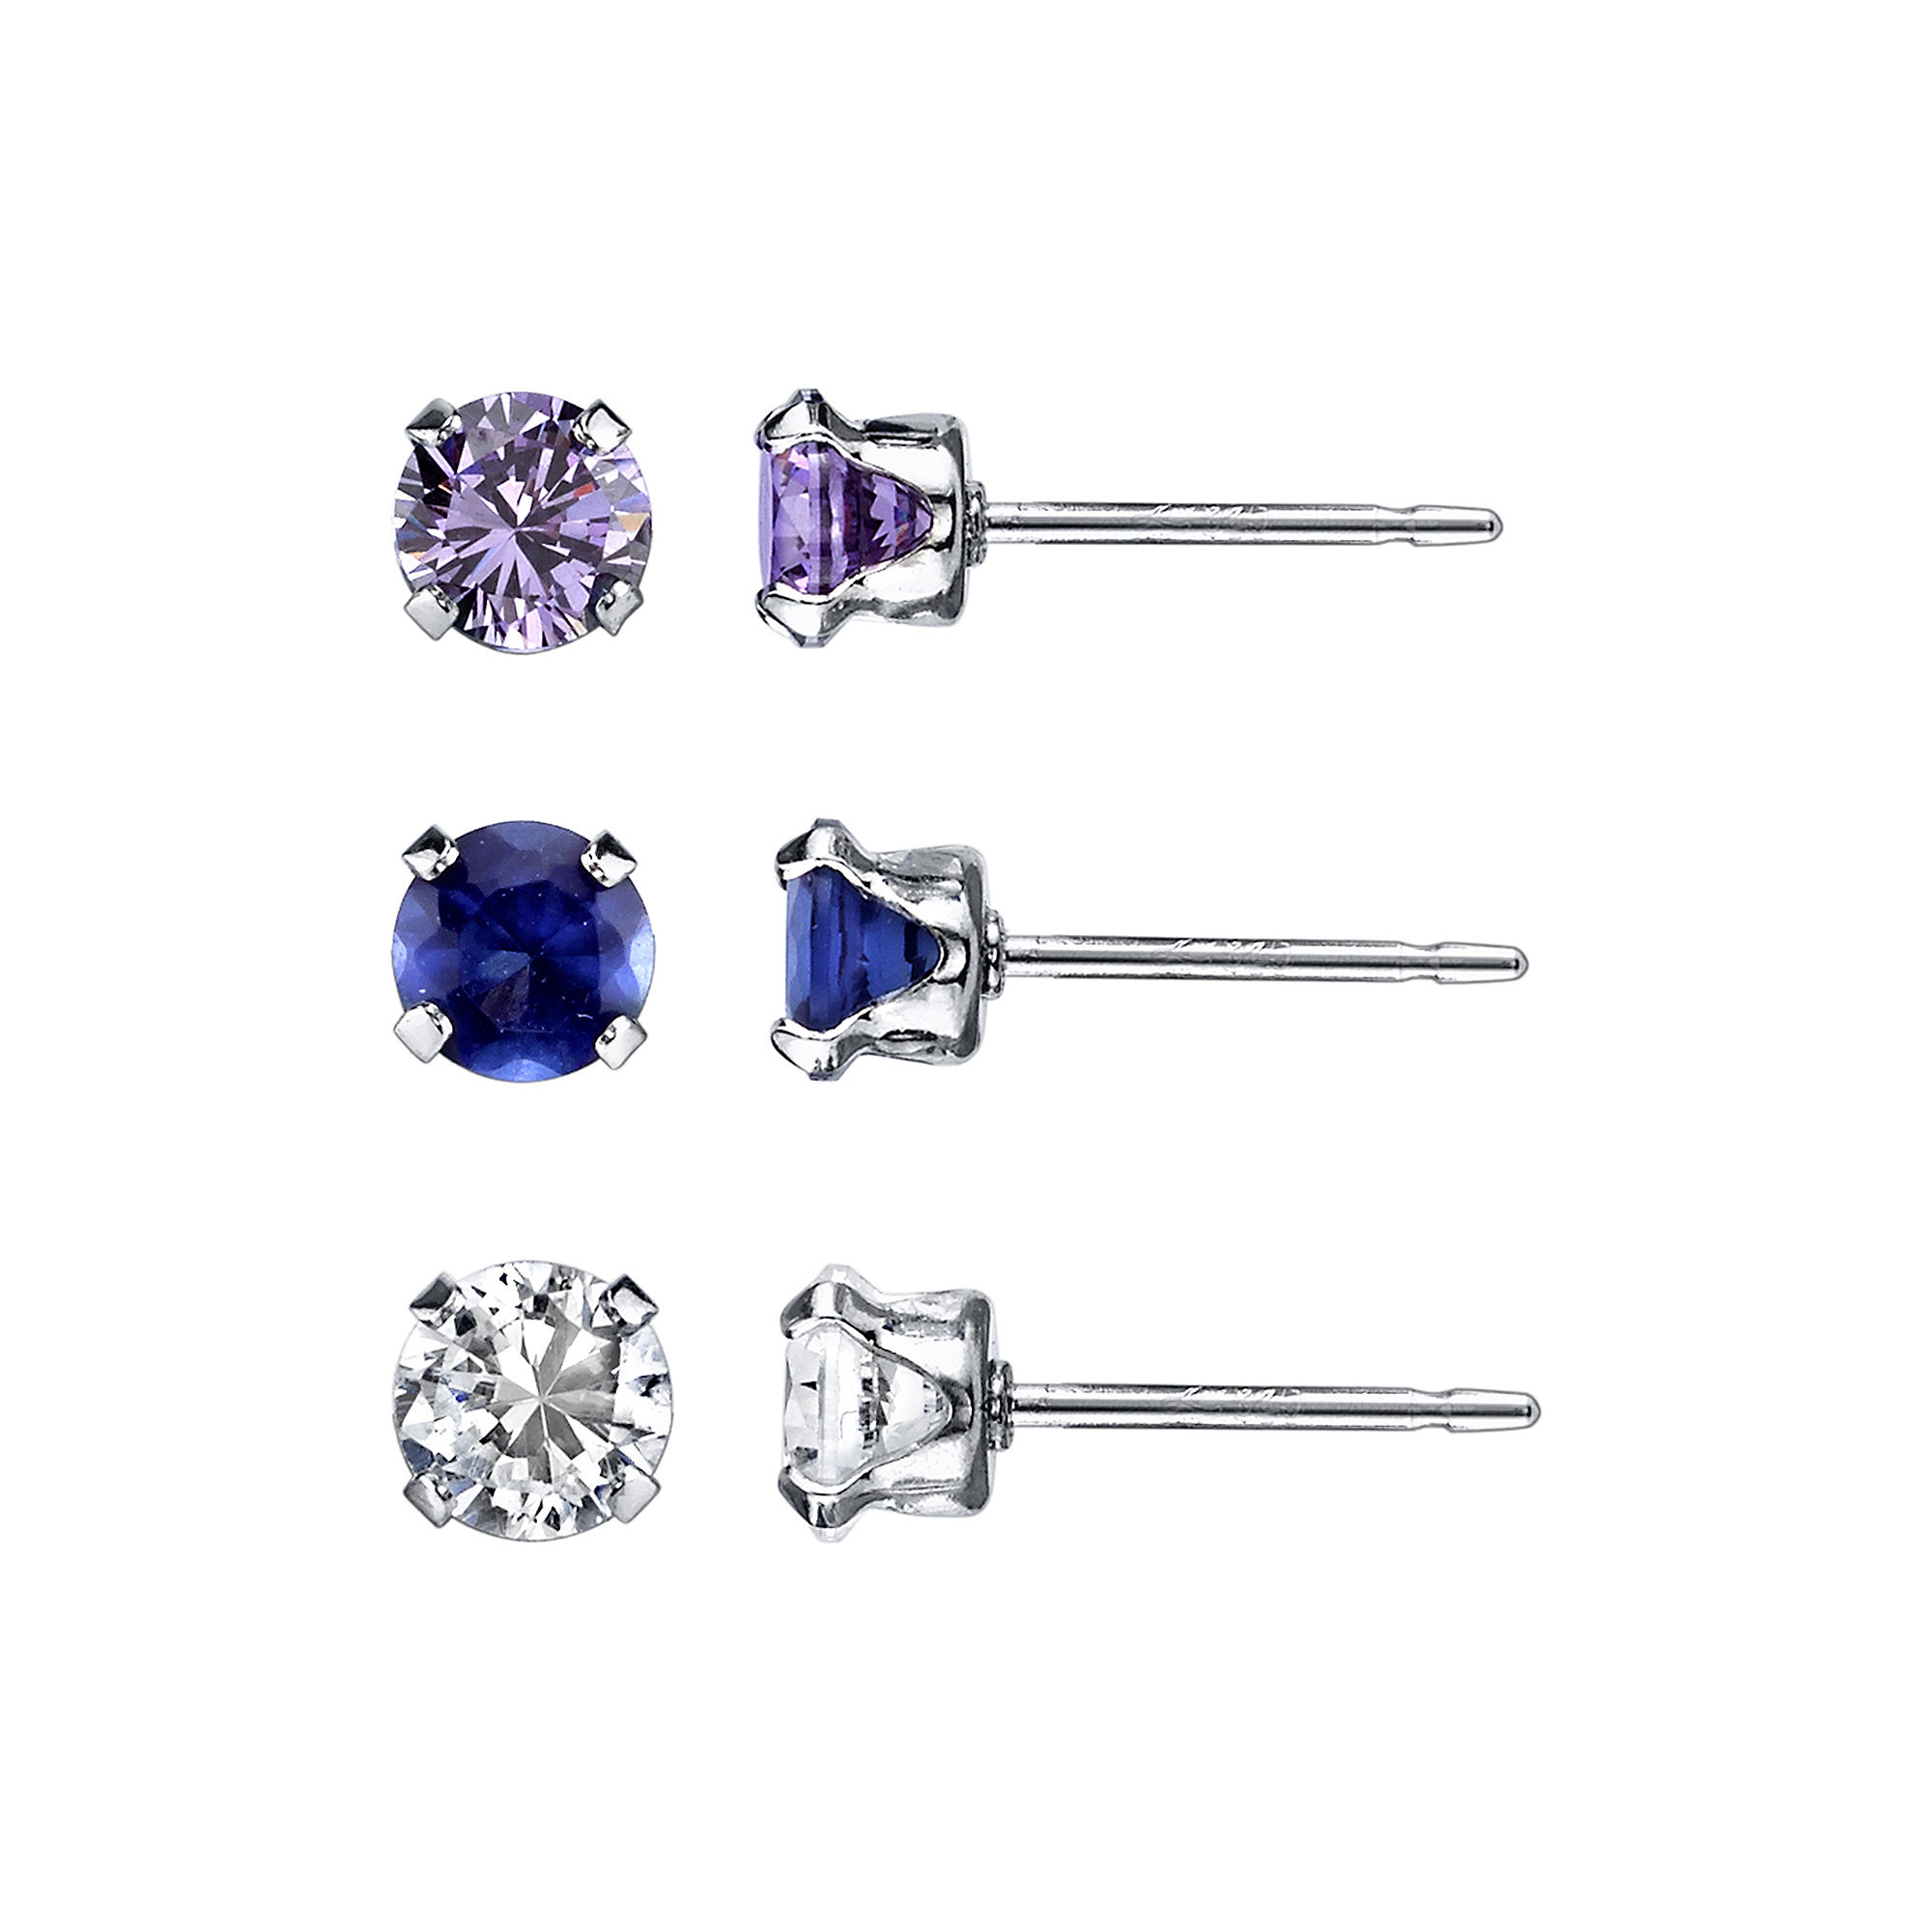 UPC 845105004238 product image for Multicolor Cubic Zirconia Sterling Silver 3-pr. Stud Earring Set | upcitemdb.com